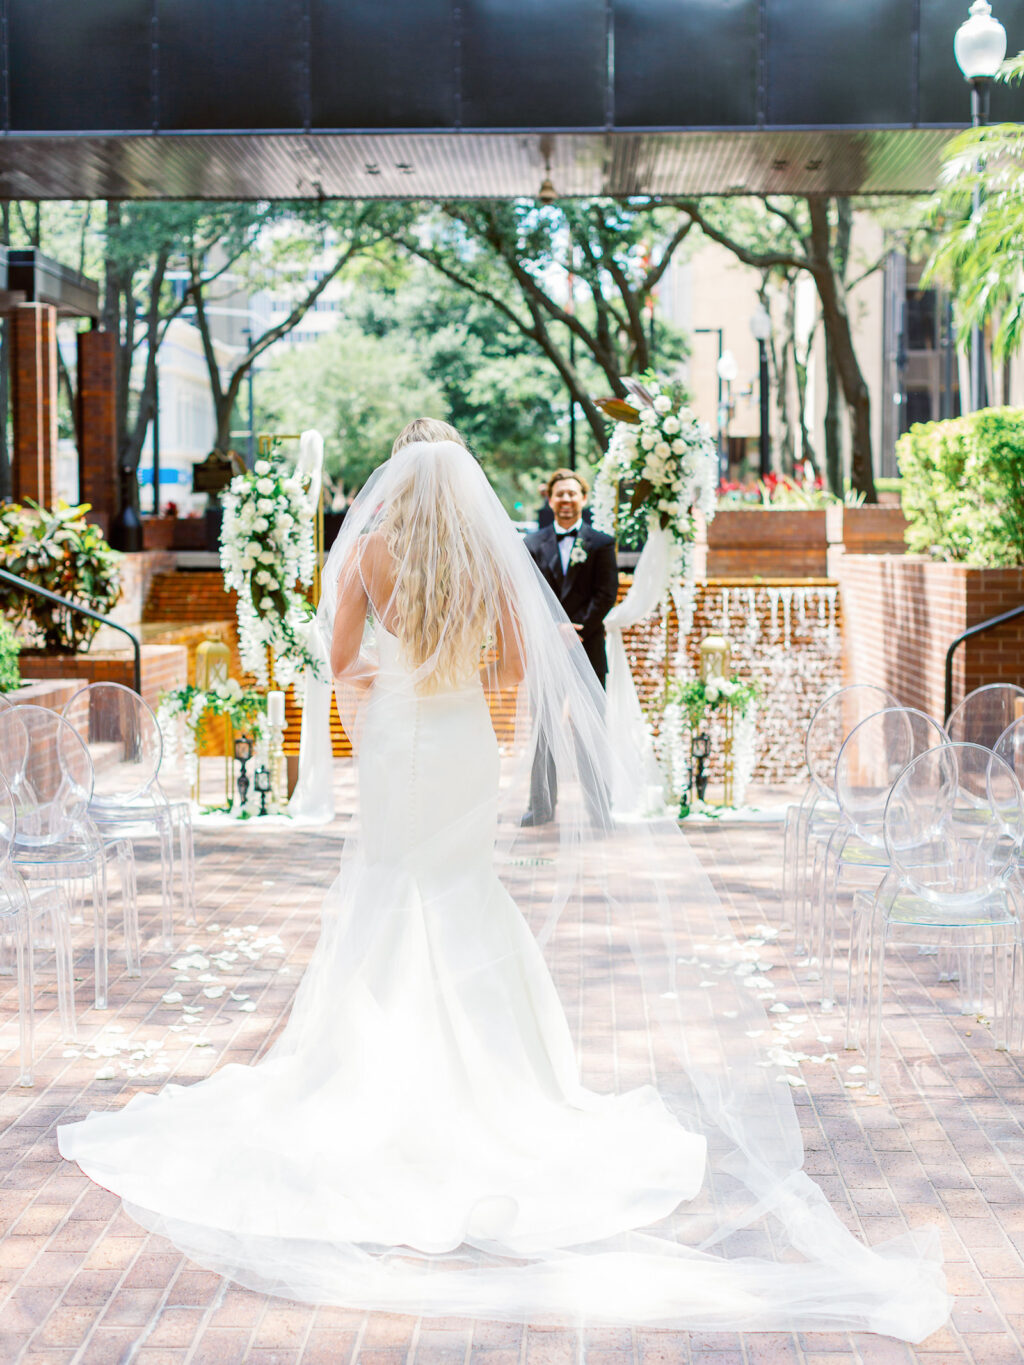 Groom Sees Bride for the First Time Walking Down the Aisle in Fit and Flare Wedding Gown Portrait | Truly Forever Bridal